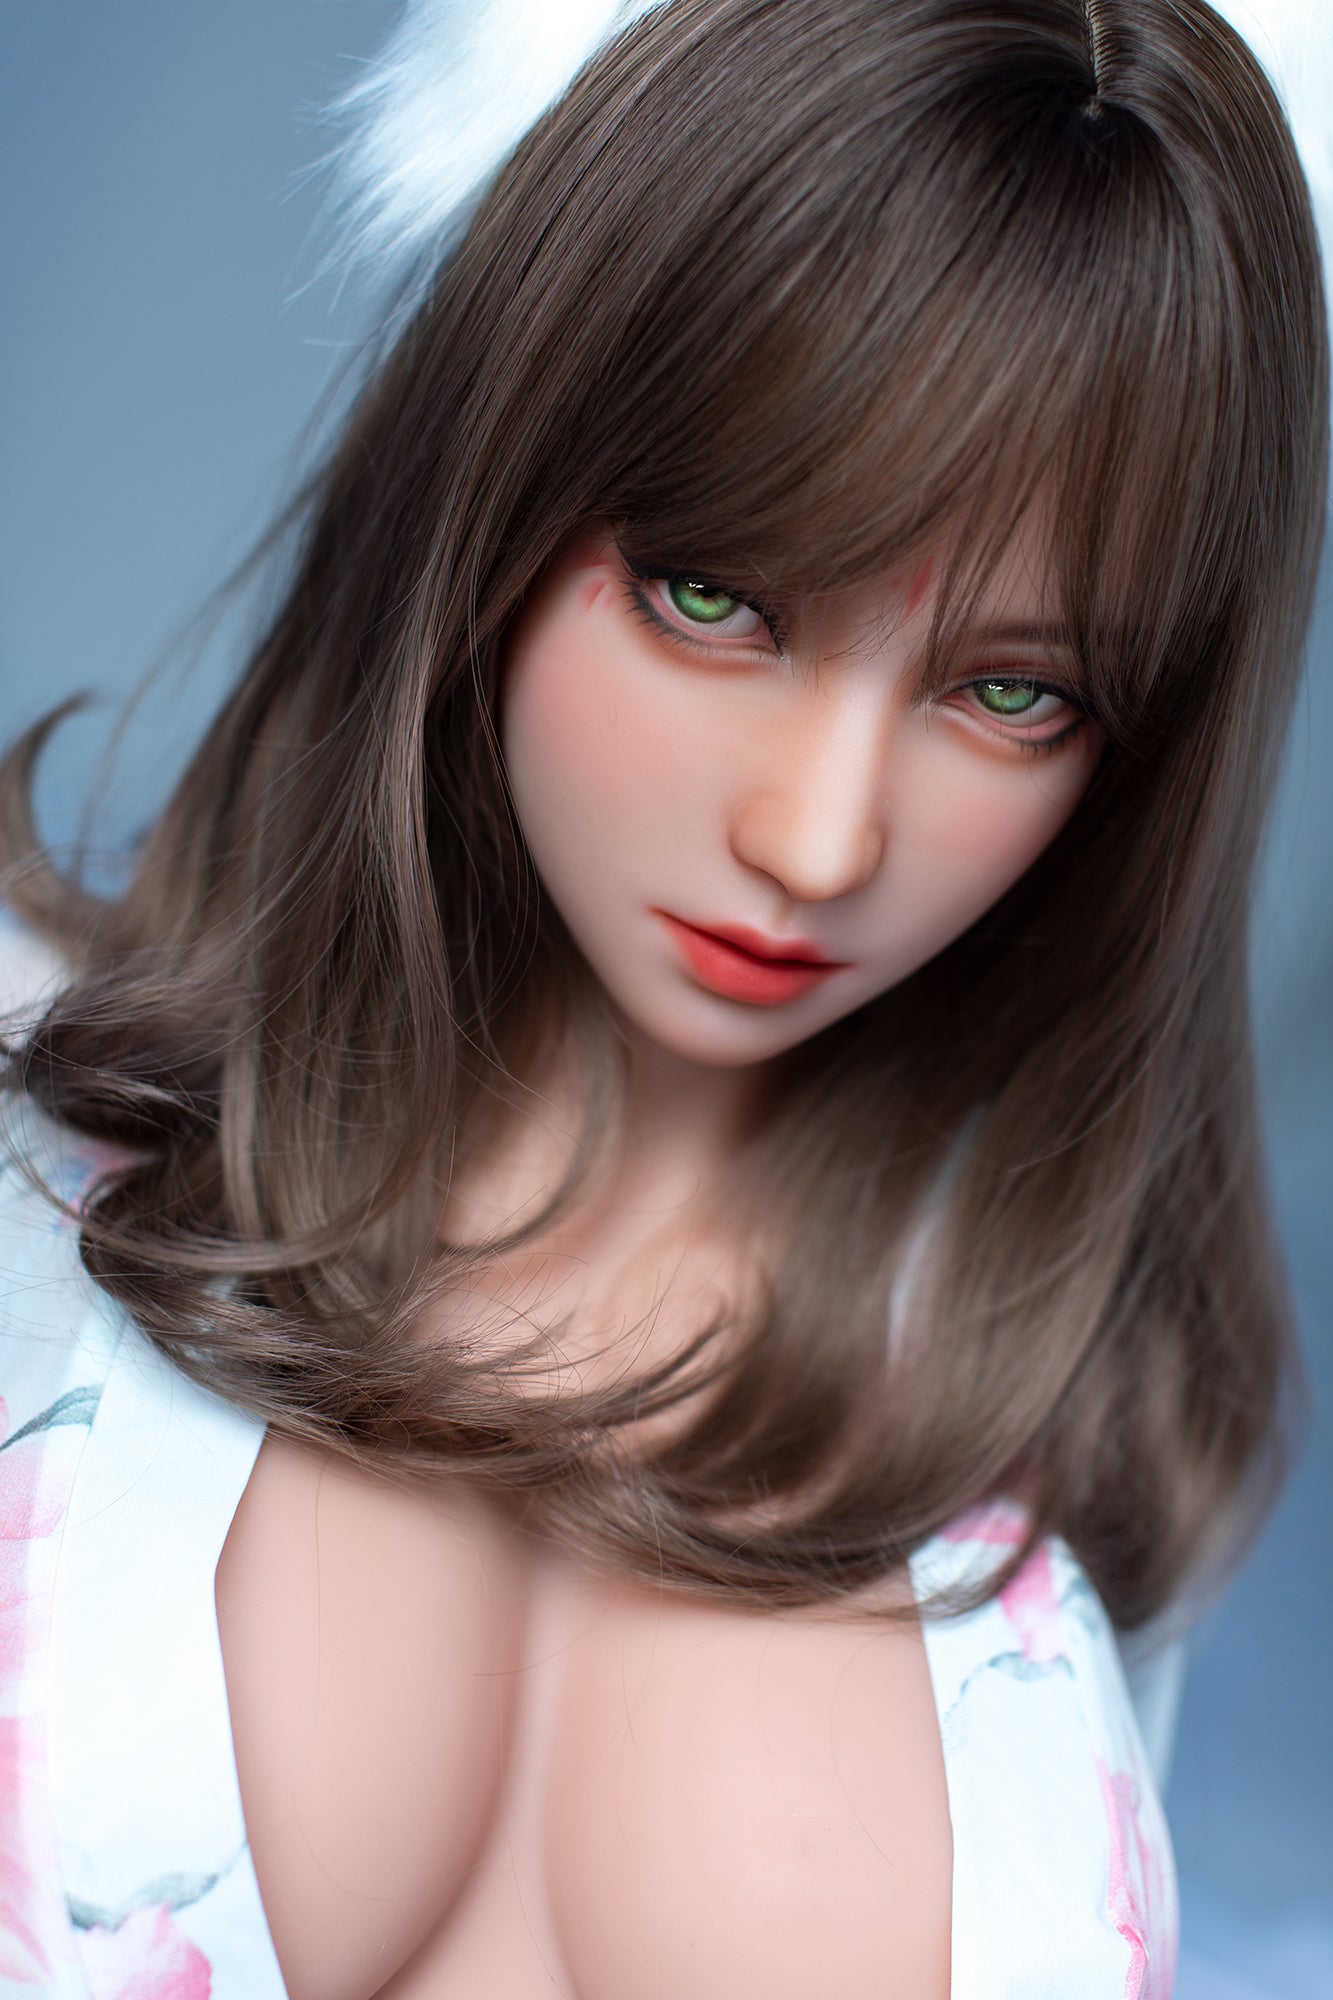 Exquisite Make-up real doll porn